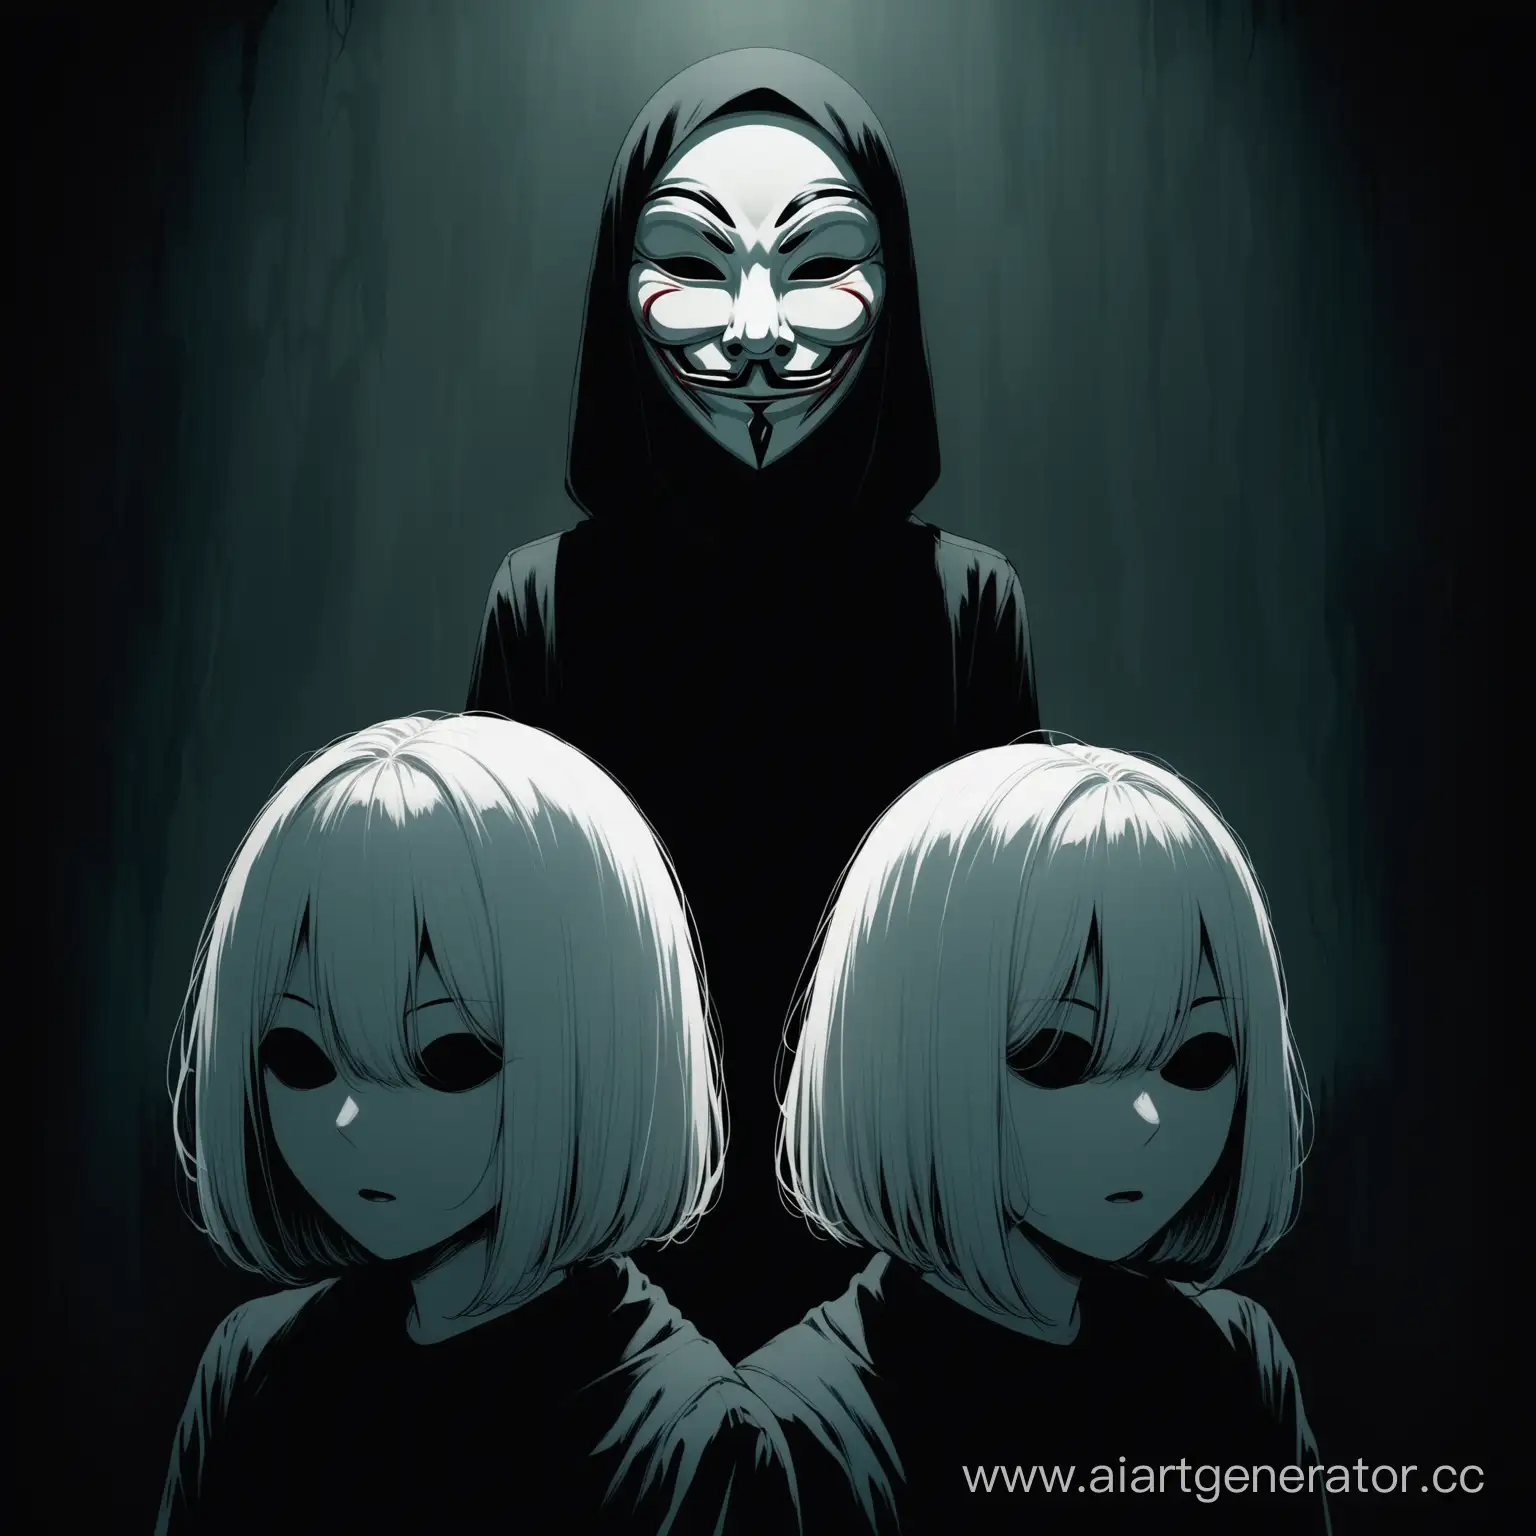 Creepy-Horror-Scene-Two-Girls-Confronted-by-Masked-Monster